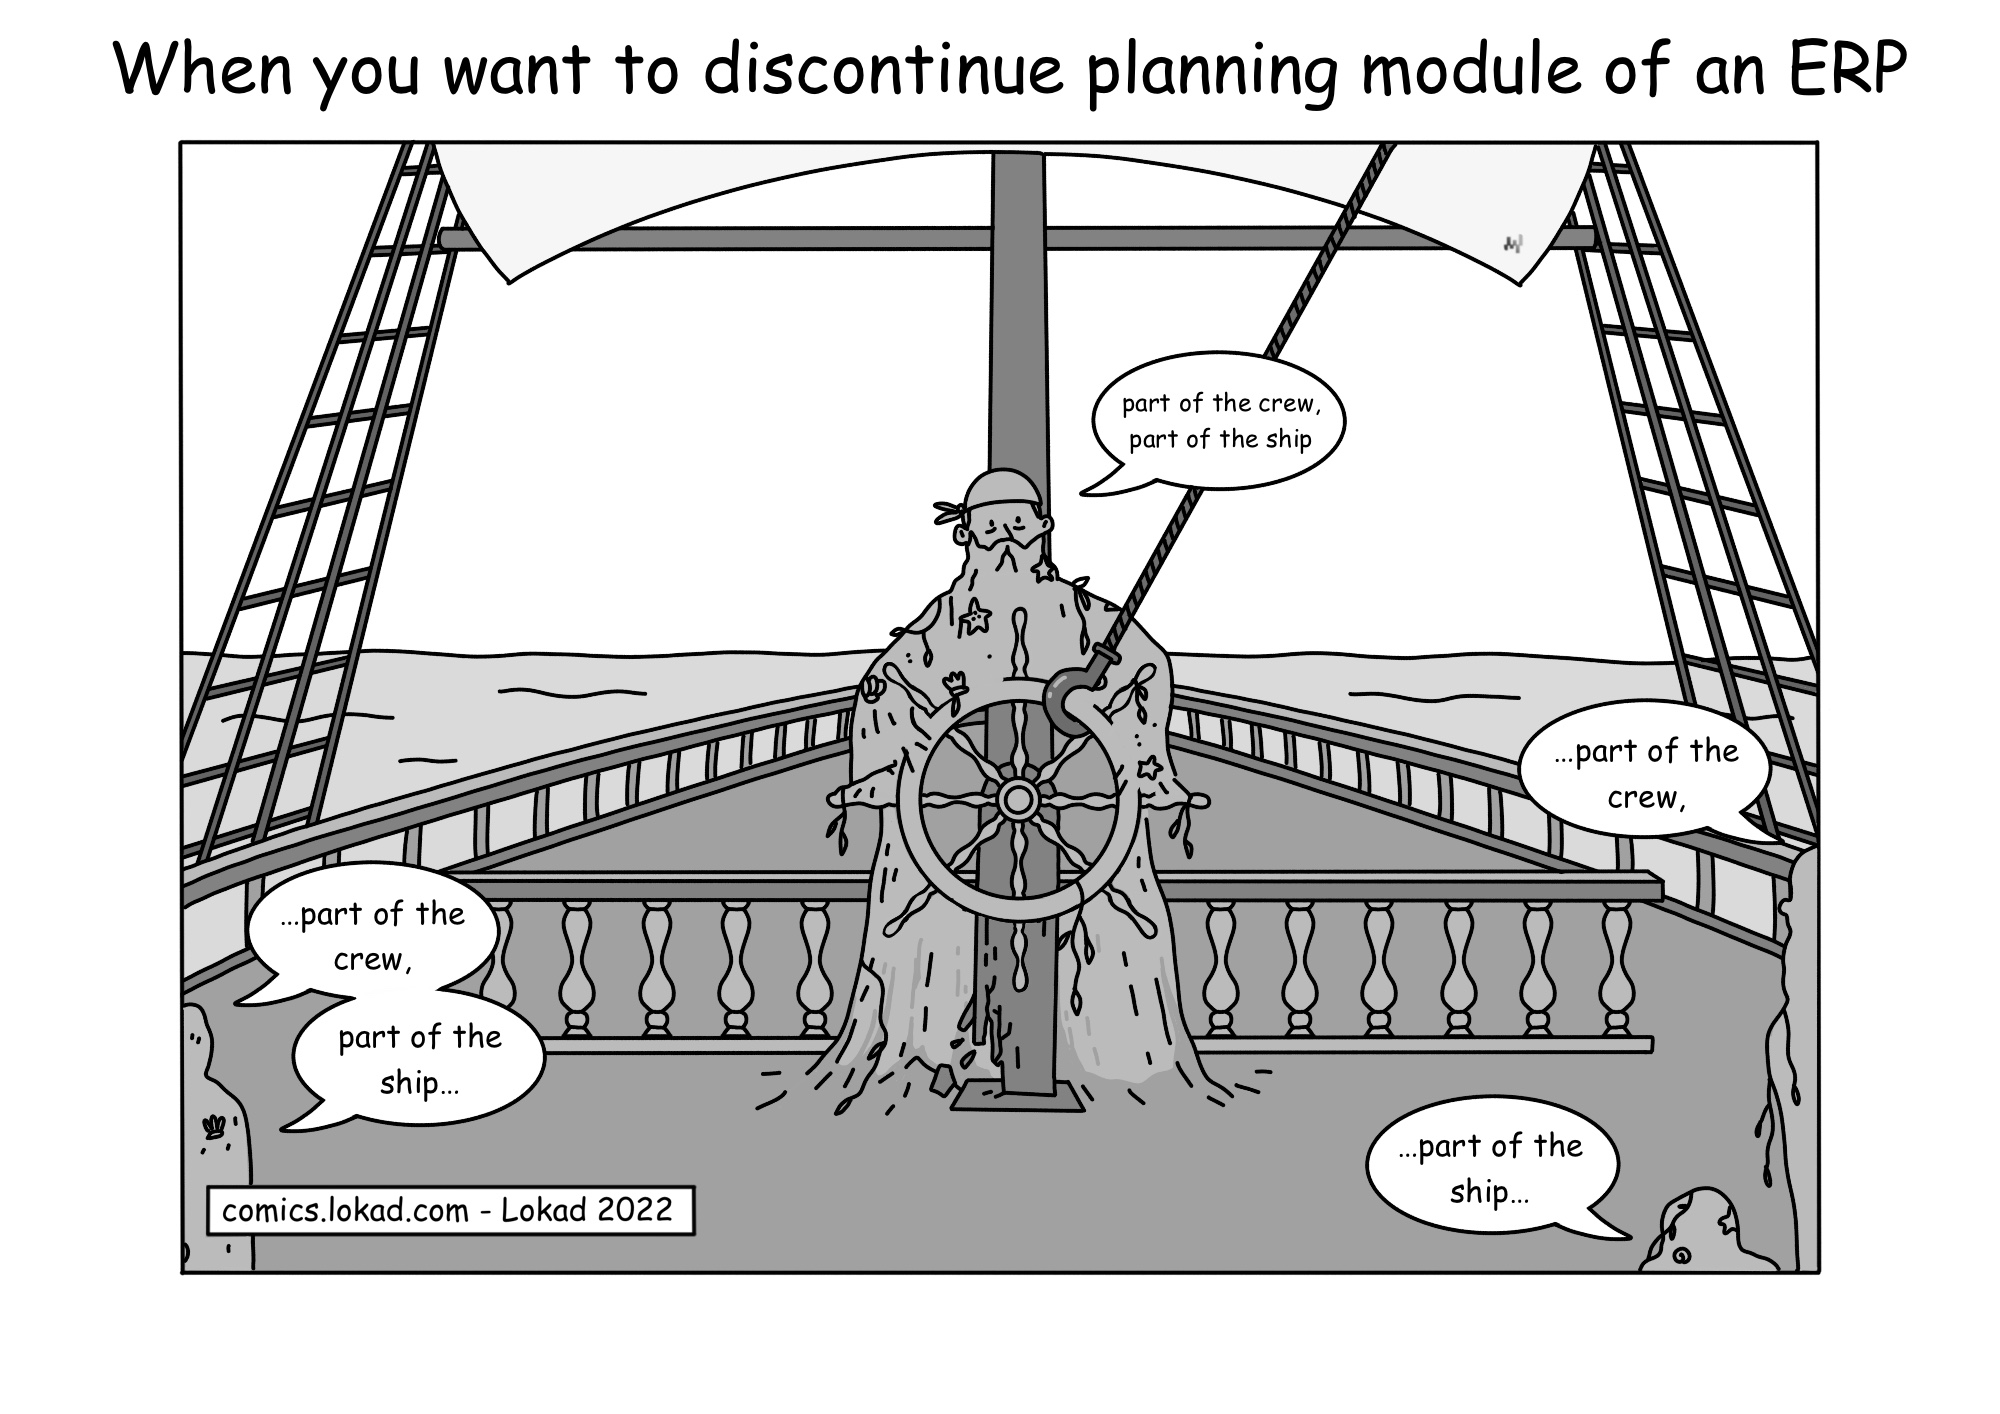 When you want to discontinue planning module of an ERP